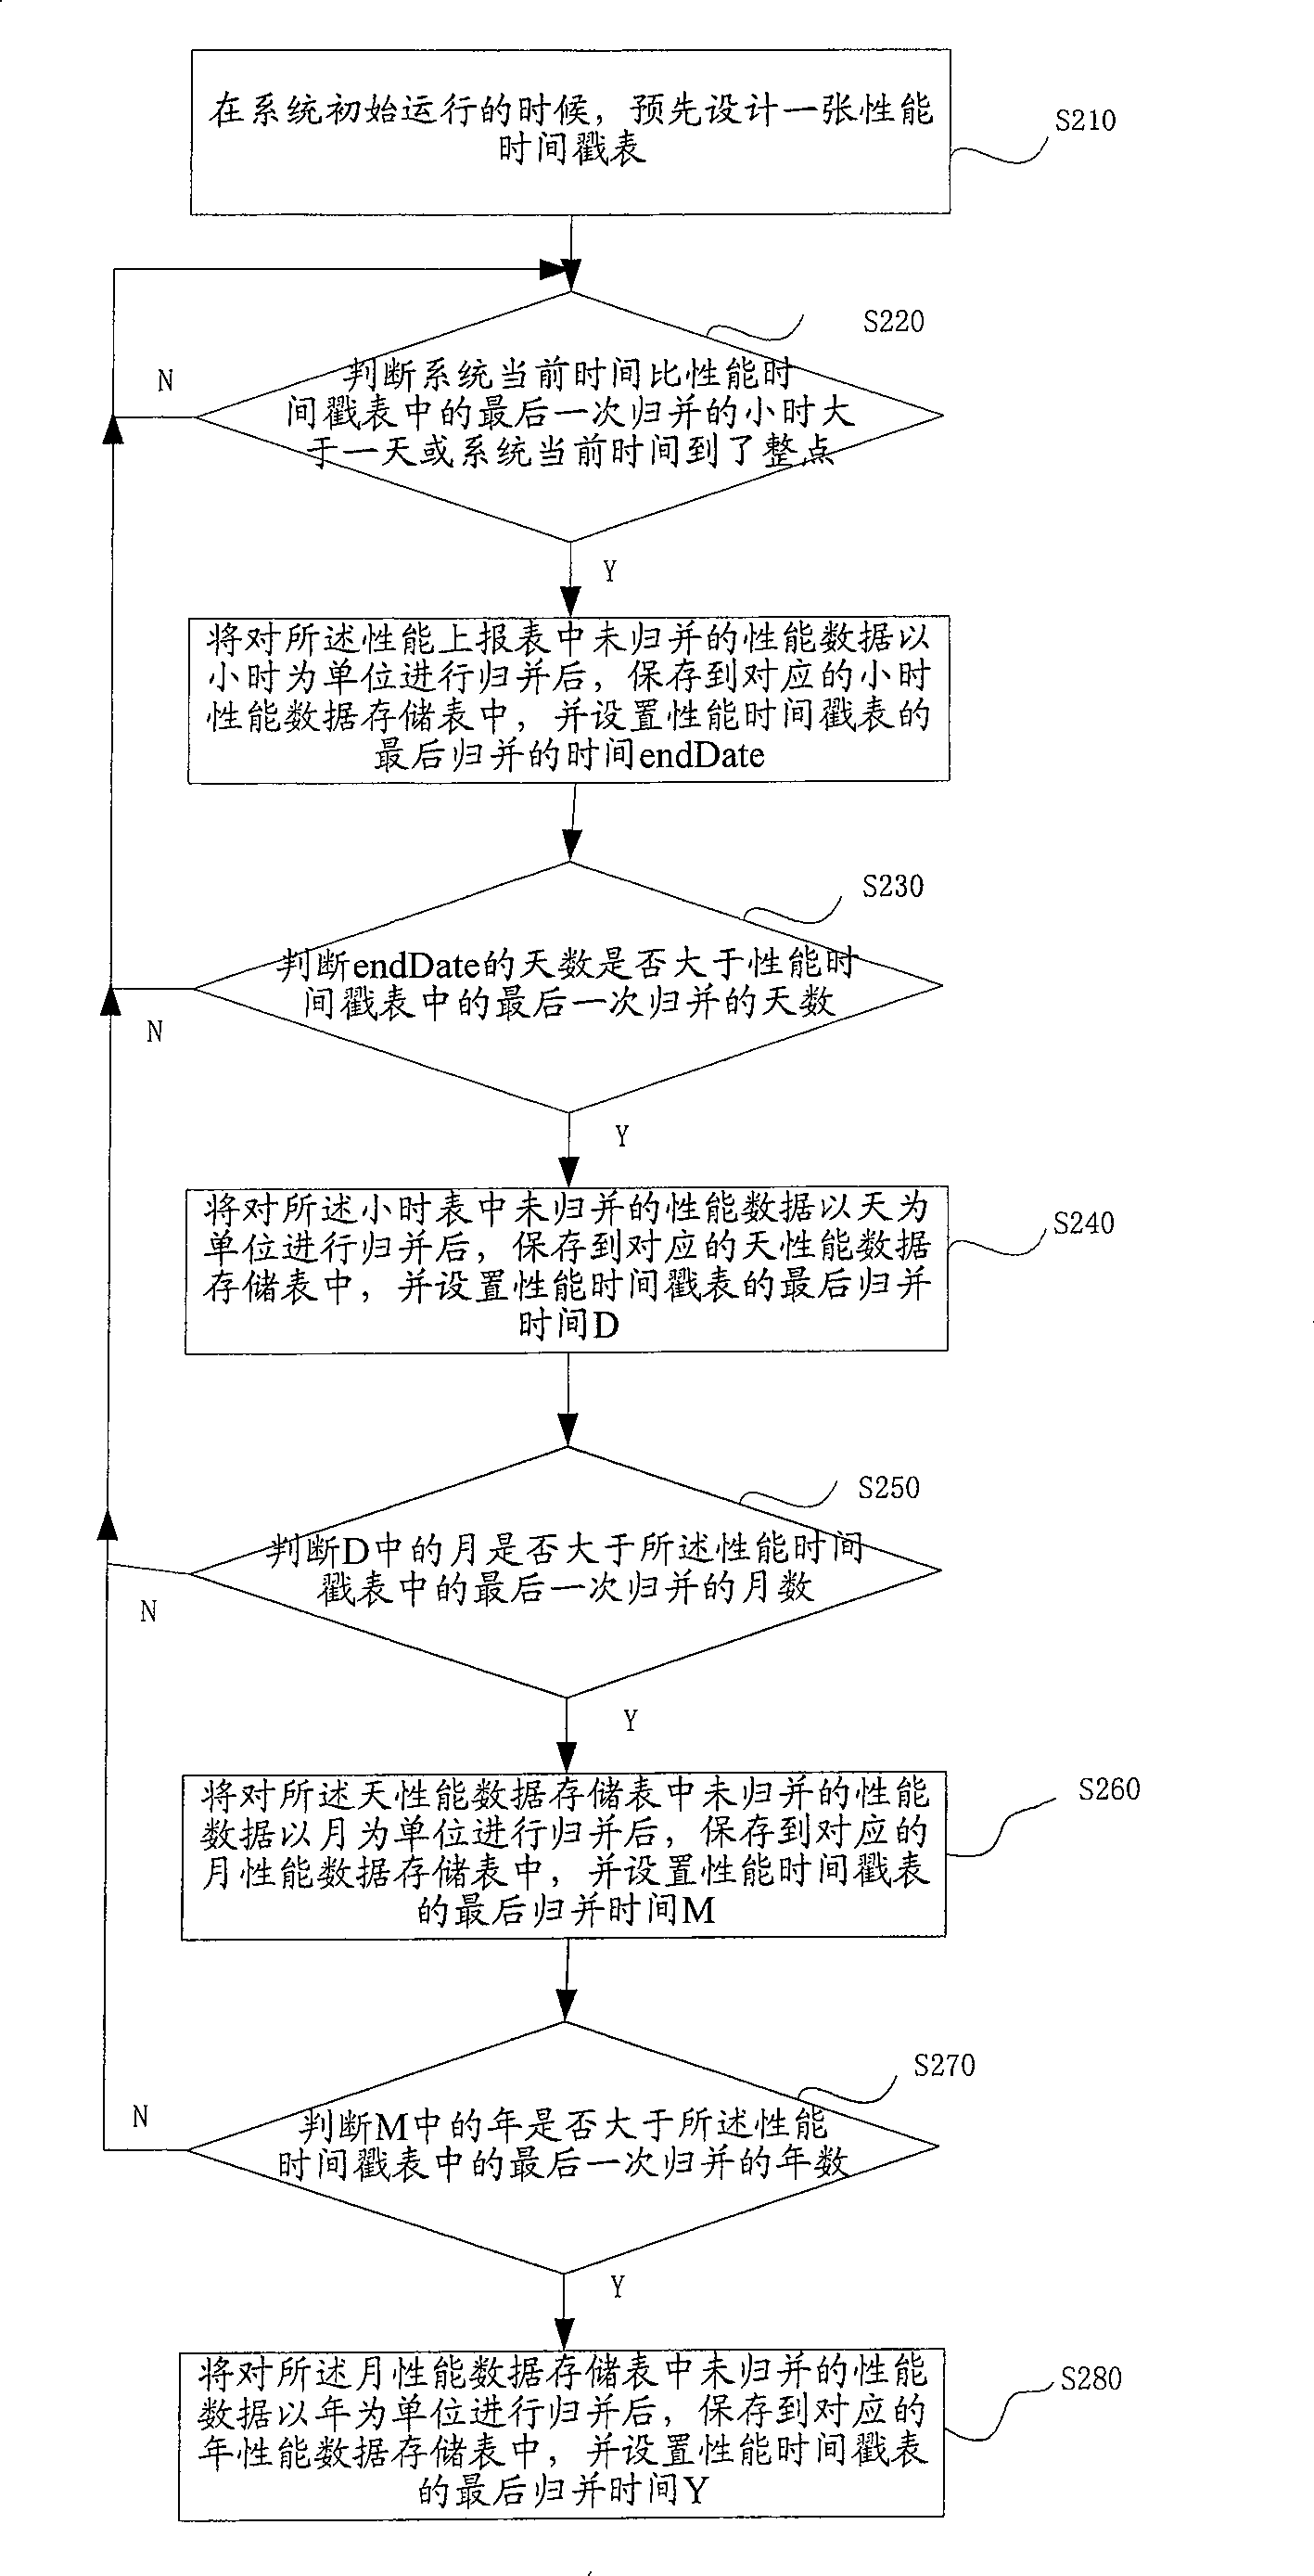 Method for statistics of mass performance data in network element management system